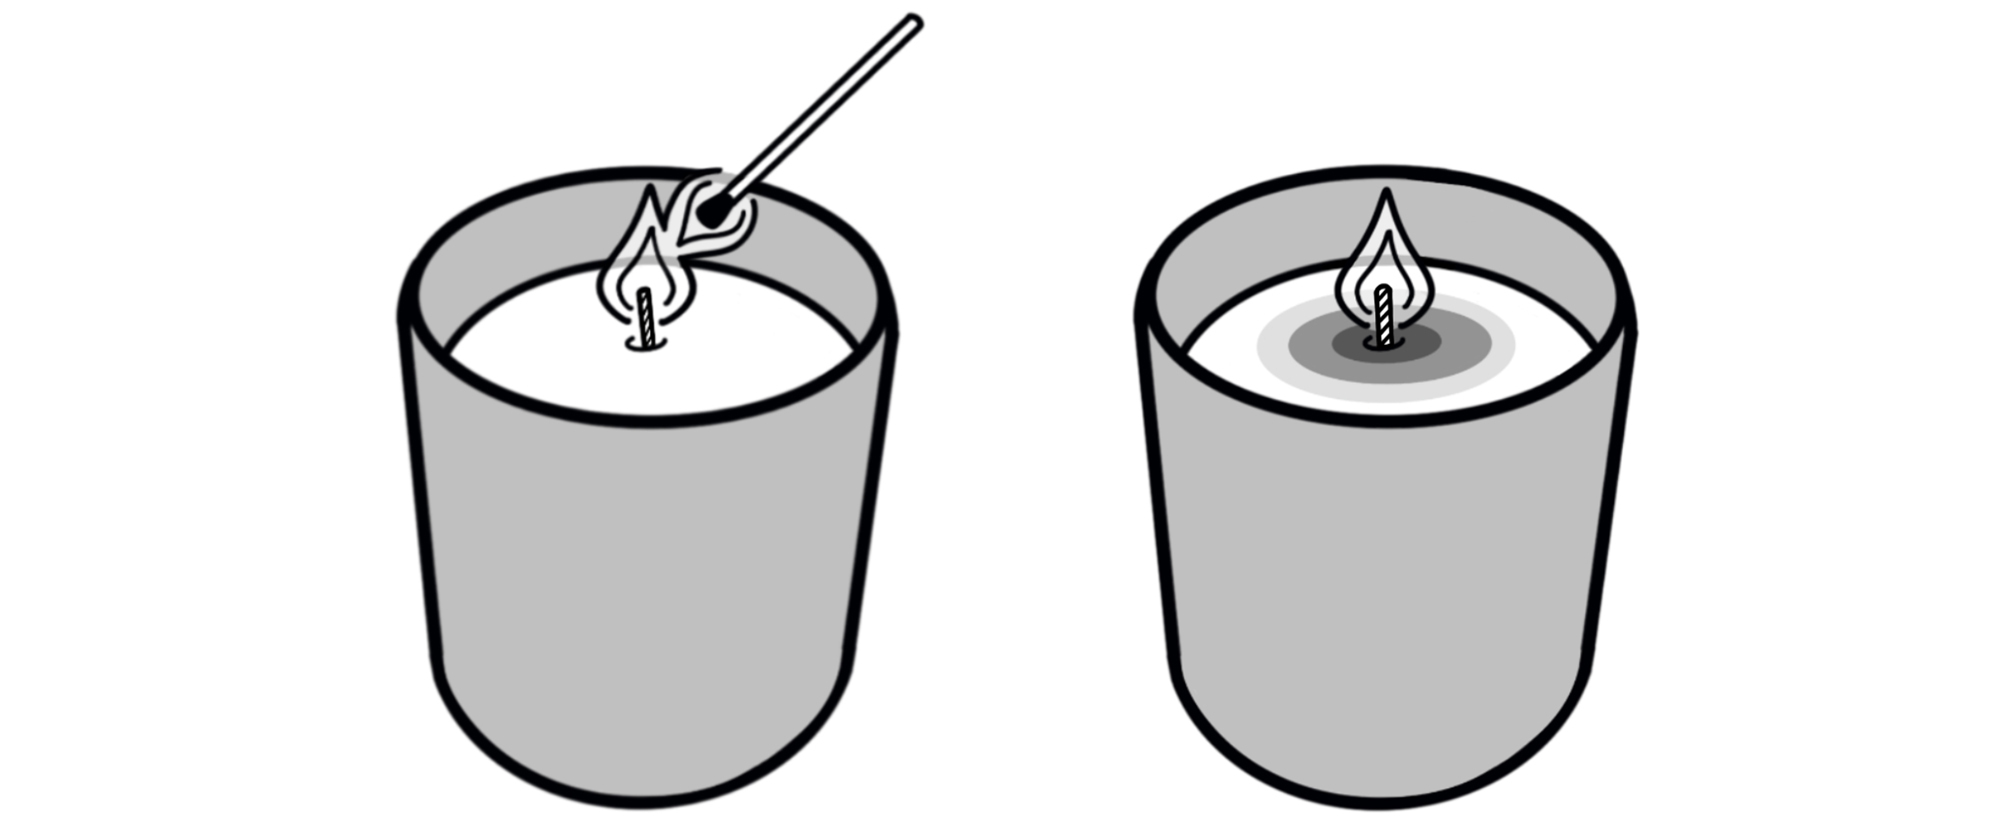 Hand-drawn digital illustrations of a candle in a jar being lit with a match and burning